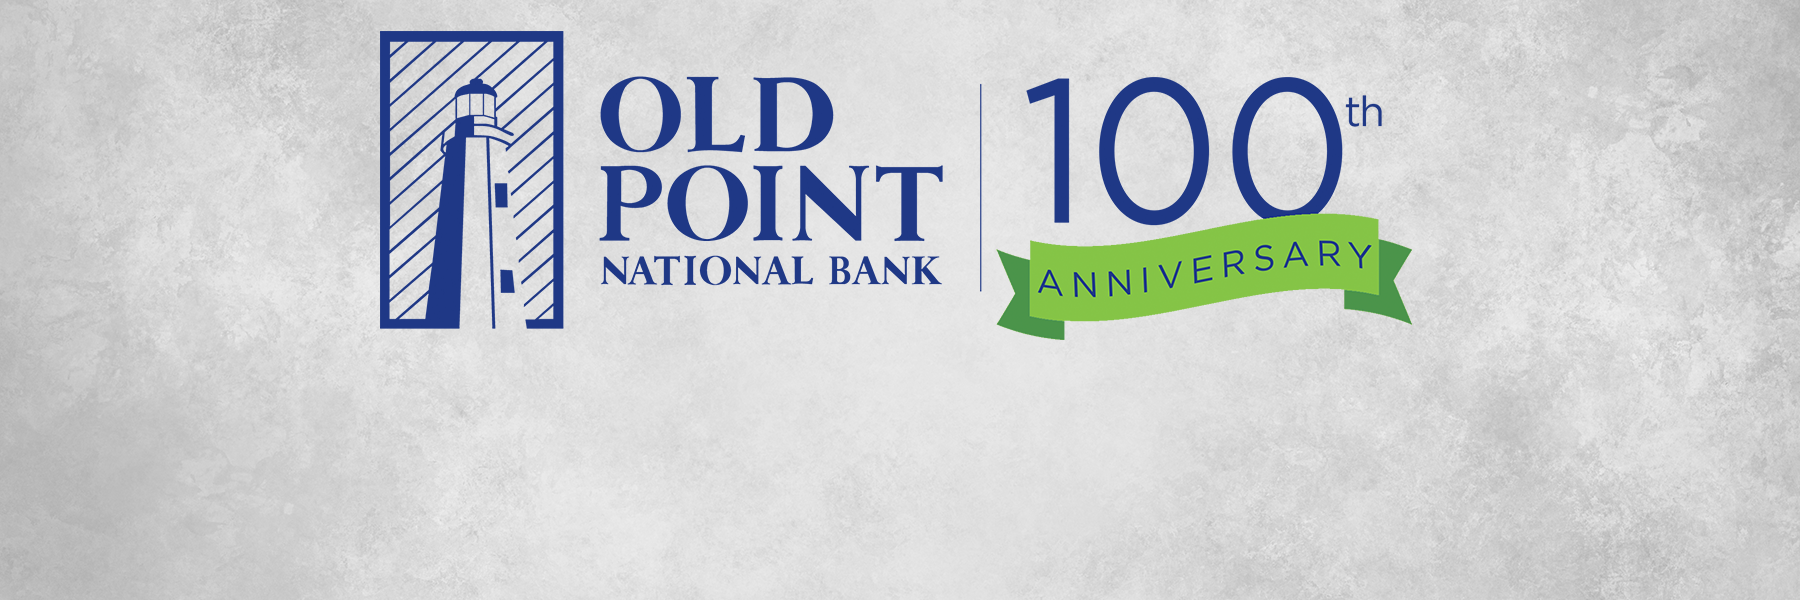 Today Old Point National Bank